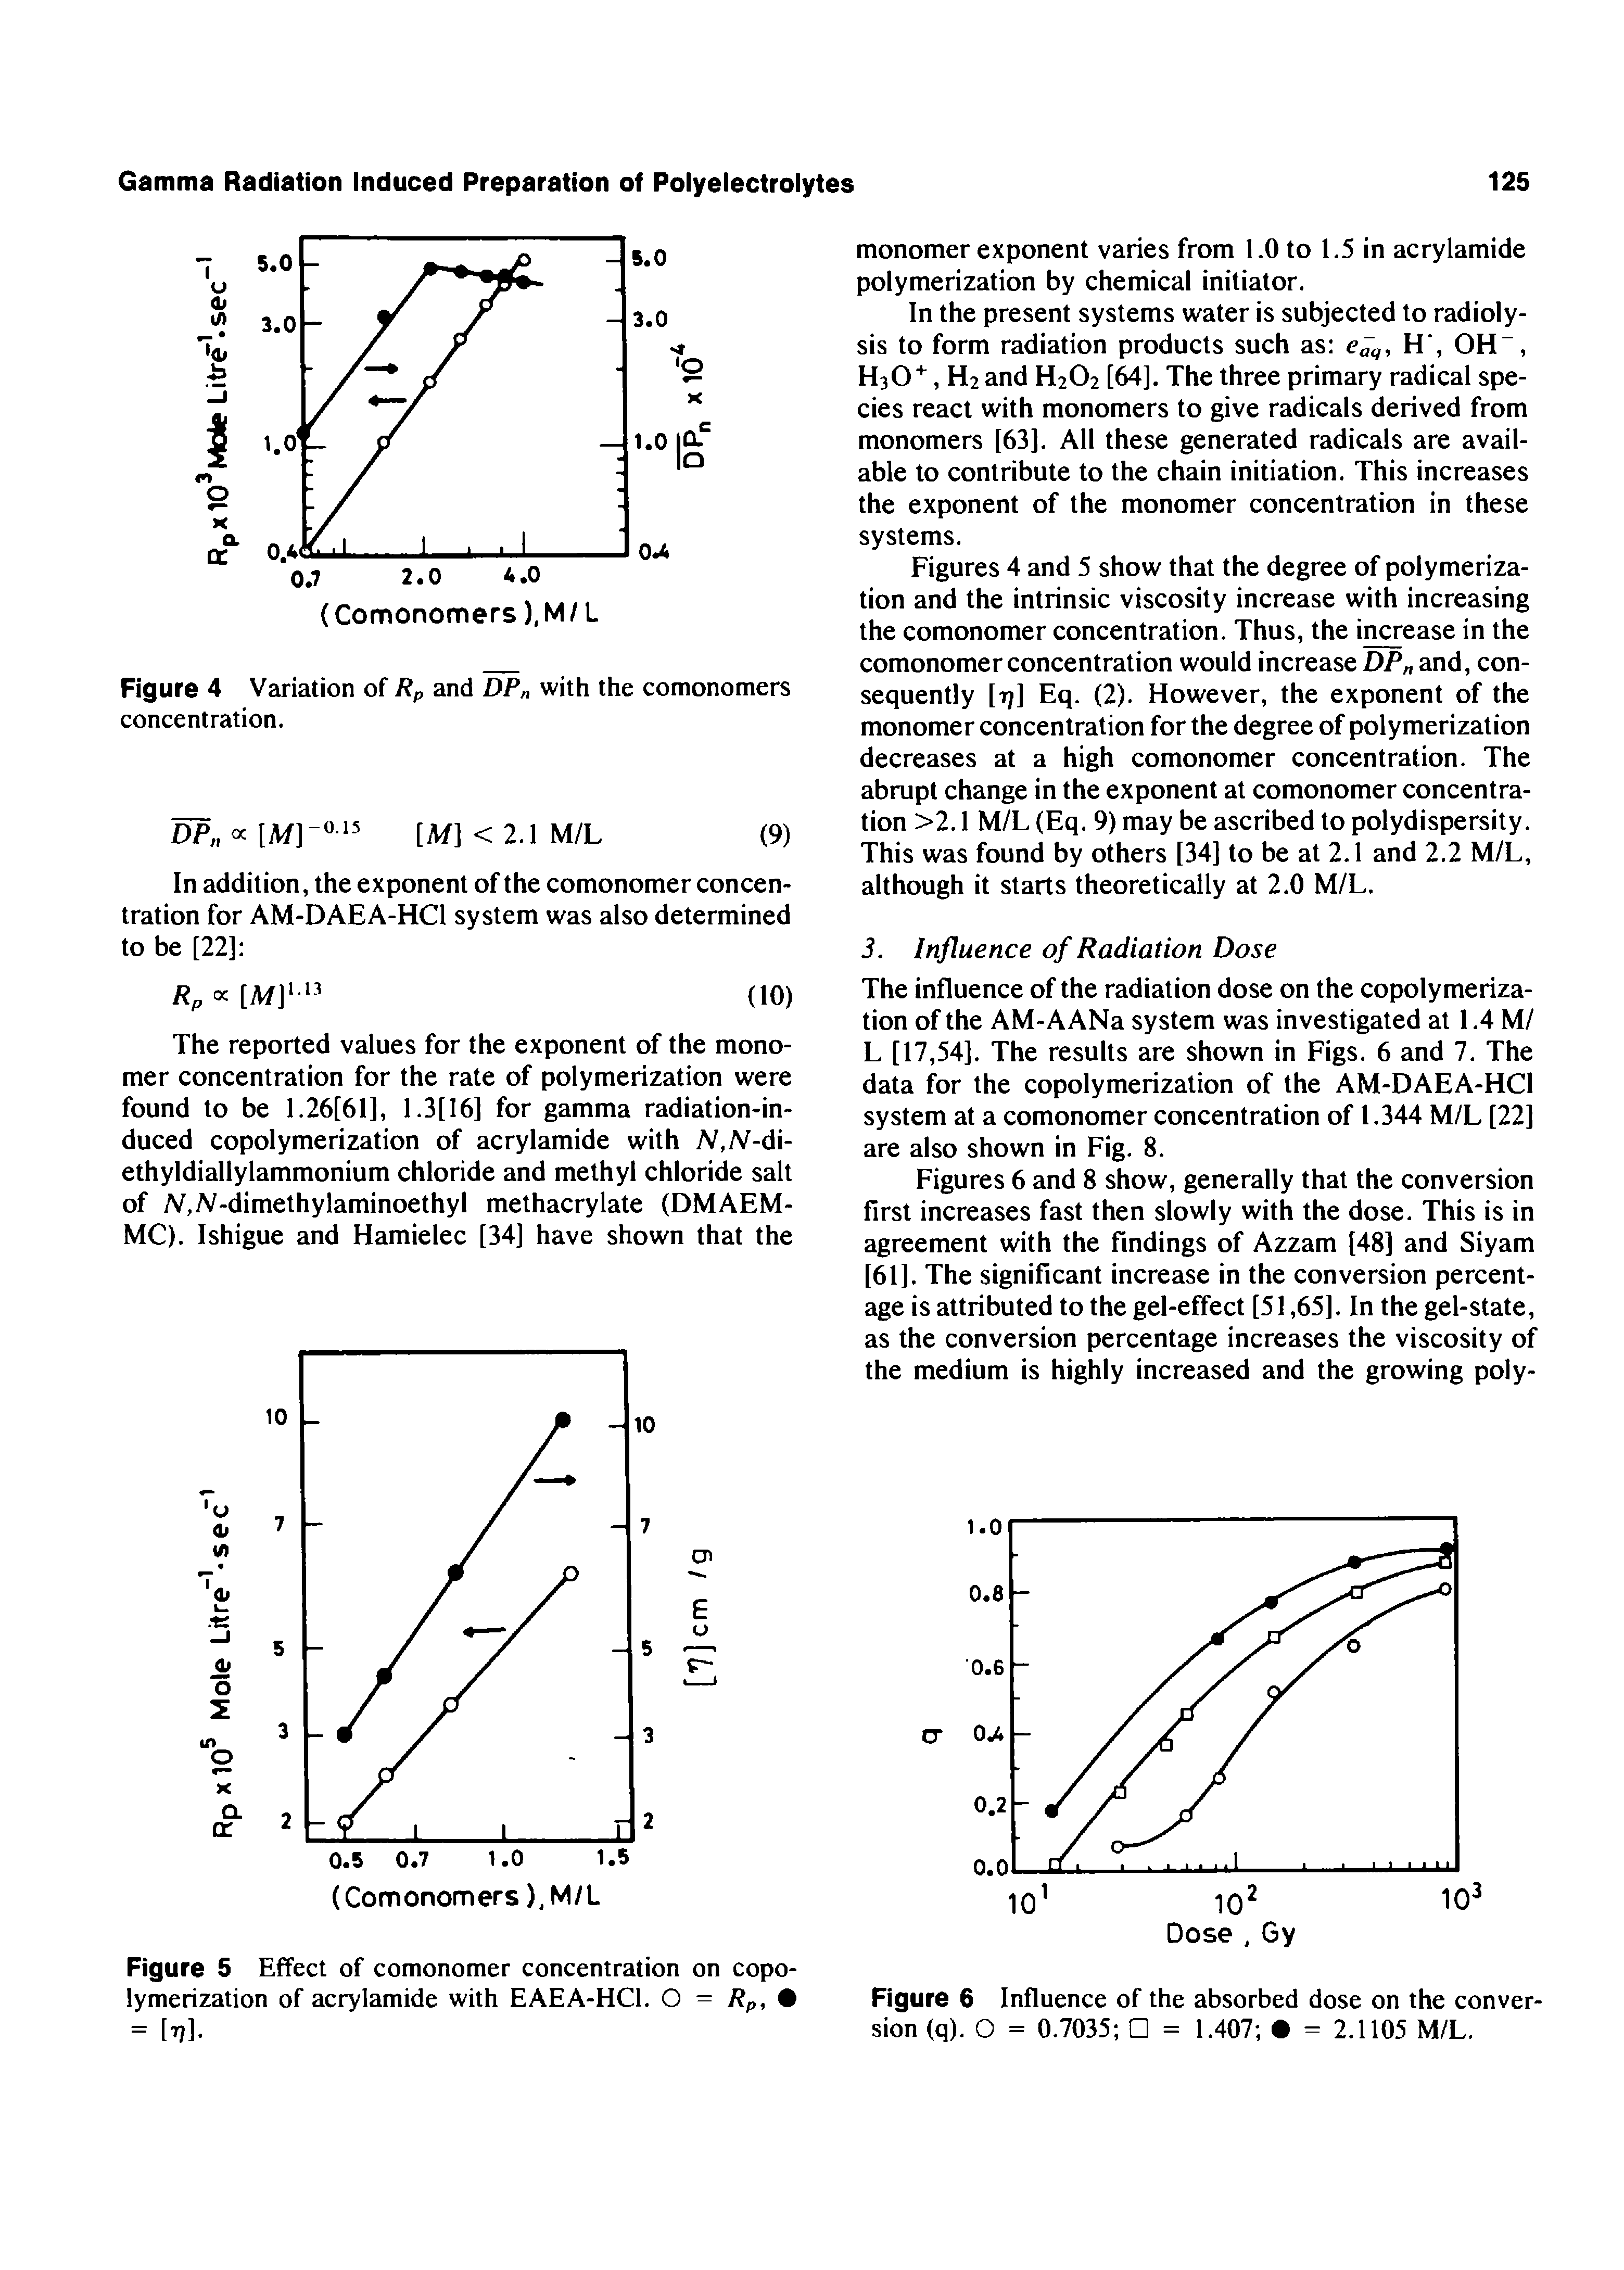 Figures 6 and 8 show, generally that the conversion first increases fast then slowly with the dose. This is in agreement with the findings of Azzam [48] and Siyam [61]. The significant increase in the conversion percentage is attributed to the gel-effect [51,65]. In the gel-state, as the conversion percentage increases the viscosity of the medium is highly increased and the growing poly-...